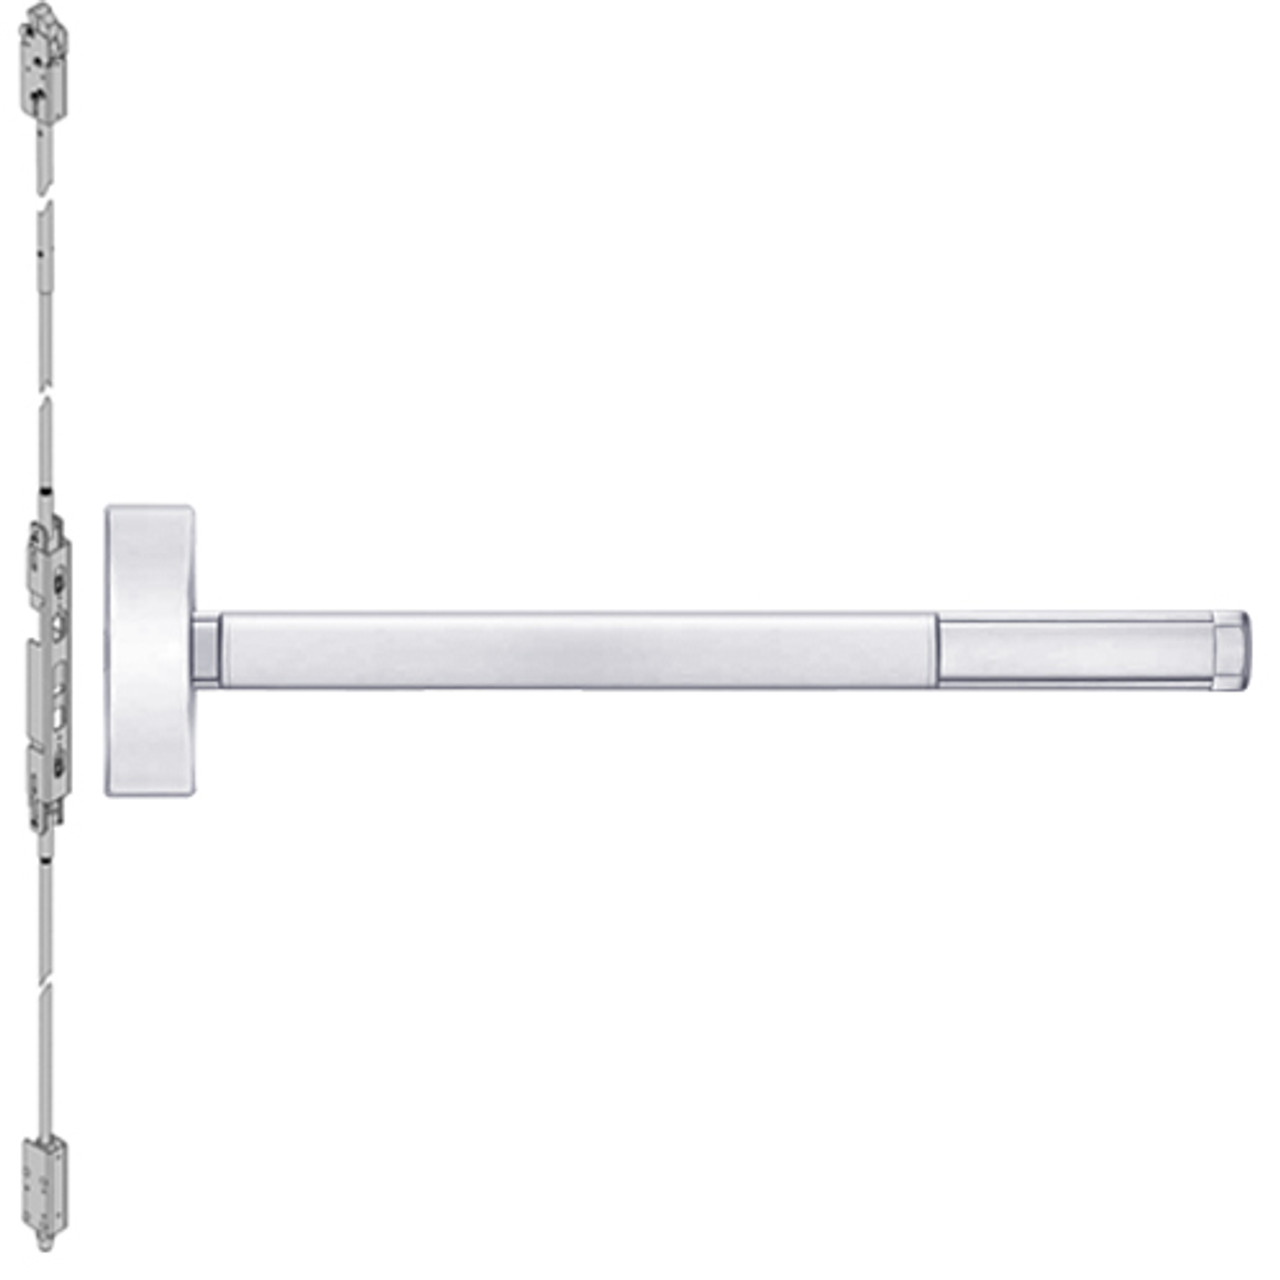 MLRFL2802-625-48 PHI 2800 Series Fire Rated Concealed Vertical Rod Exit Device with Motorized Latch Retraction Prepped for Dummy Trim in Bright Chrome Finish